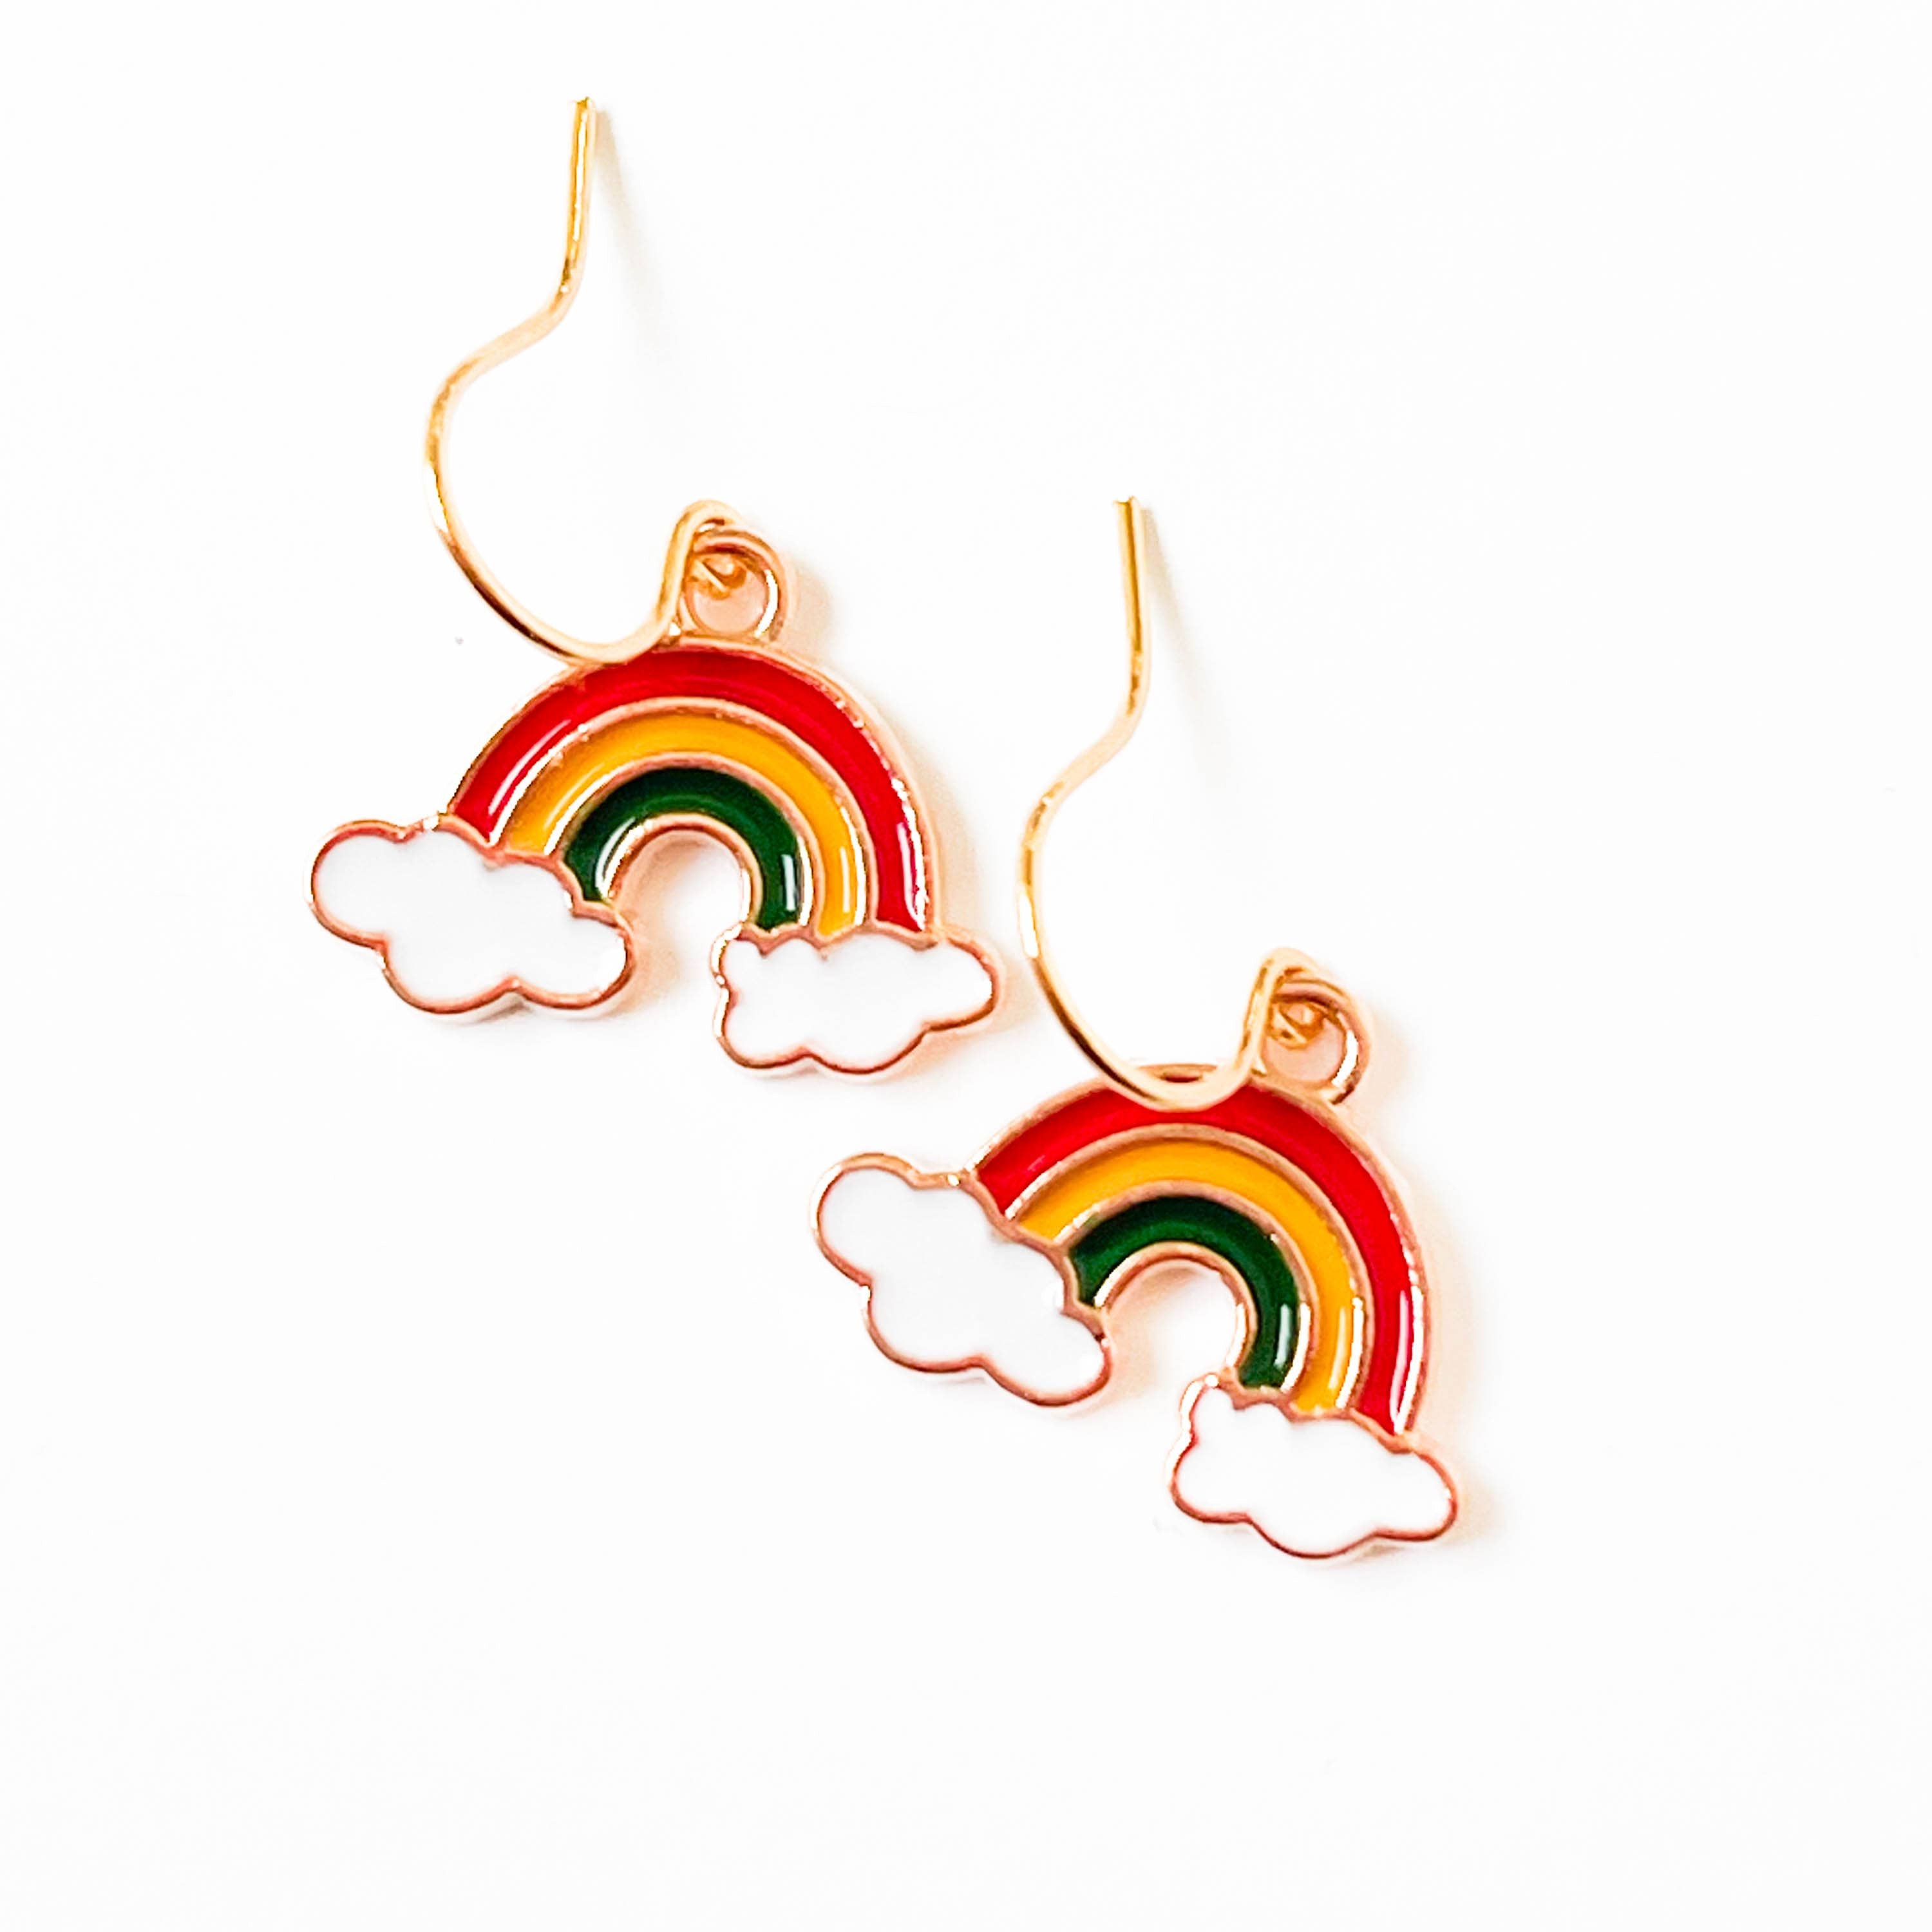 Kids Tiny Cute Charm Earrings and Clip-Ons Stocking stuffers: Red Mushrooms / Ear Wire